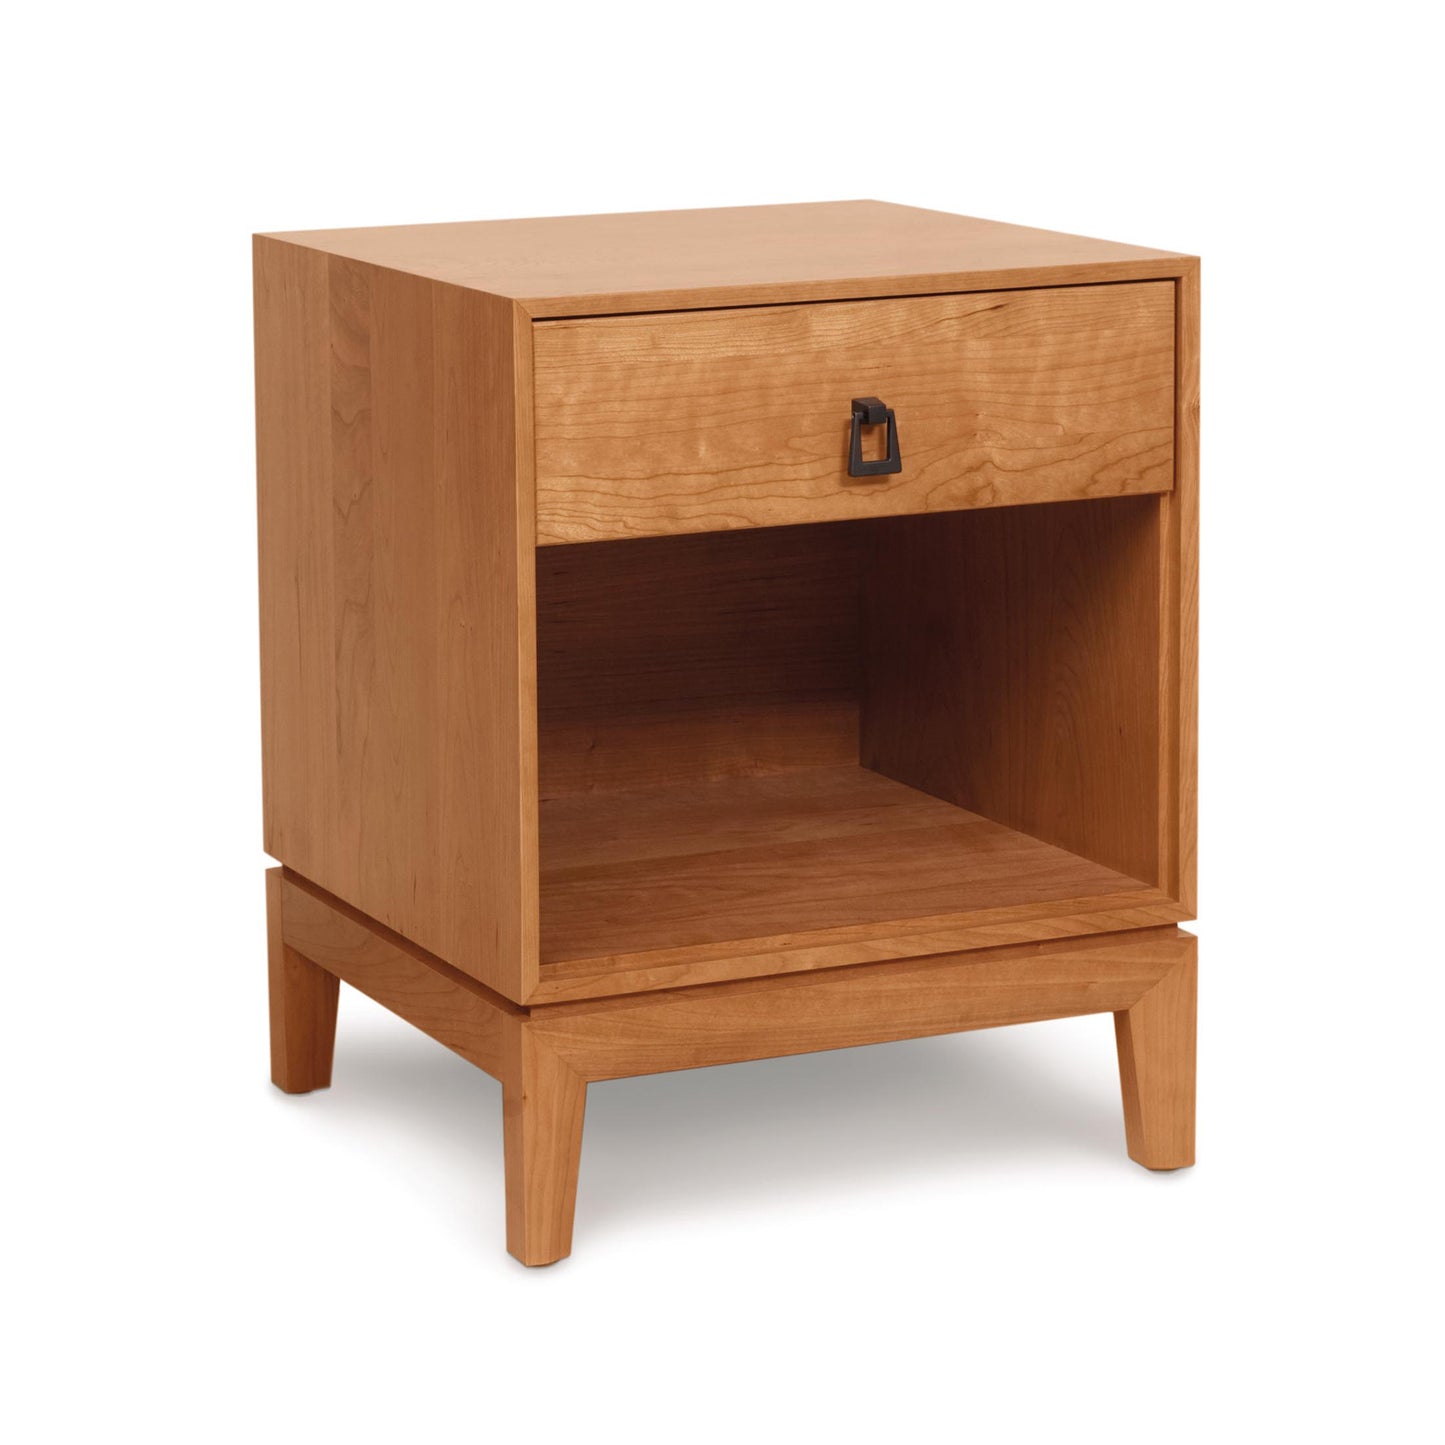 An Arts and Crafts style Mansfield 1-Drawer Enclosed Shelf Nightstand by Copeland Furniture on a white background.